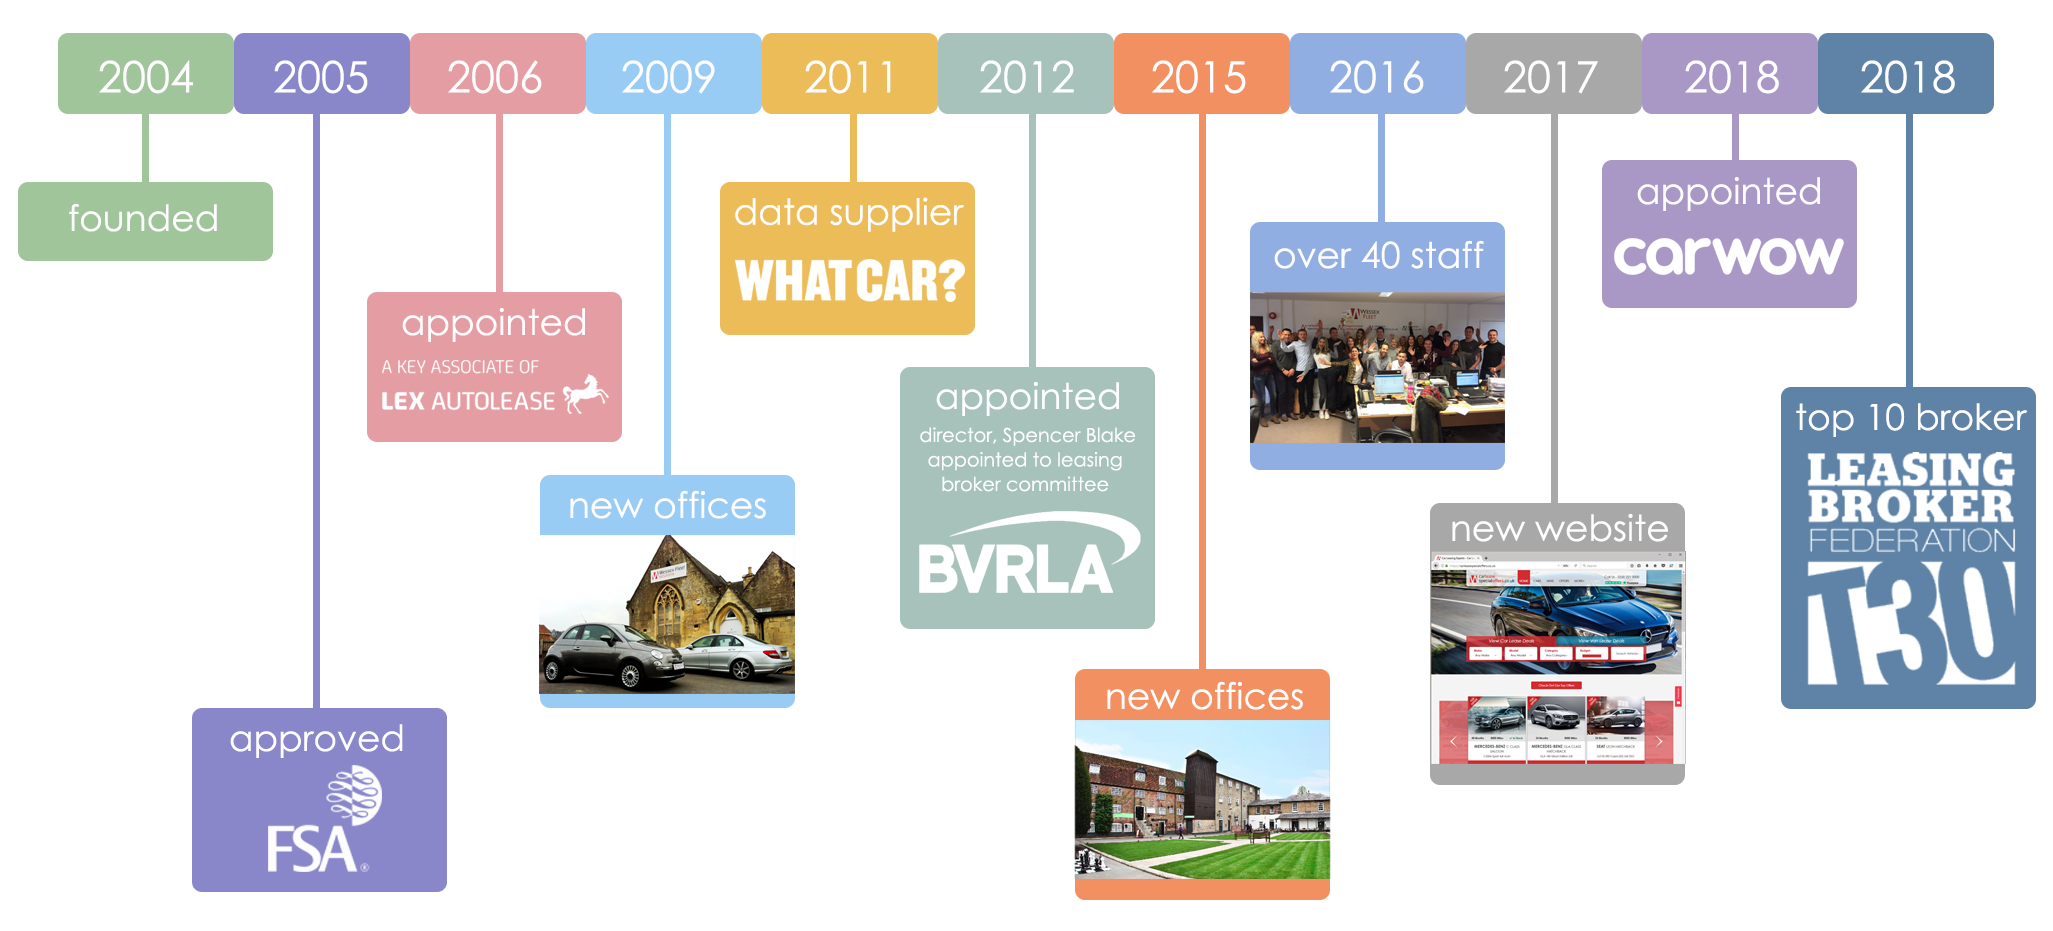 Xcite car leasing timeline of significant events